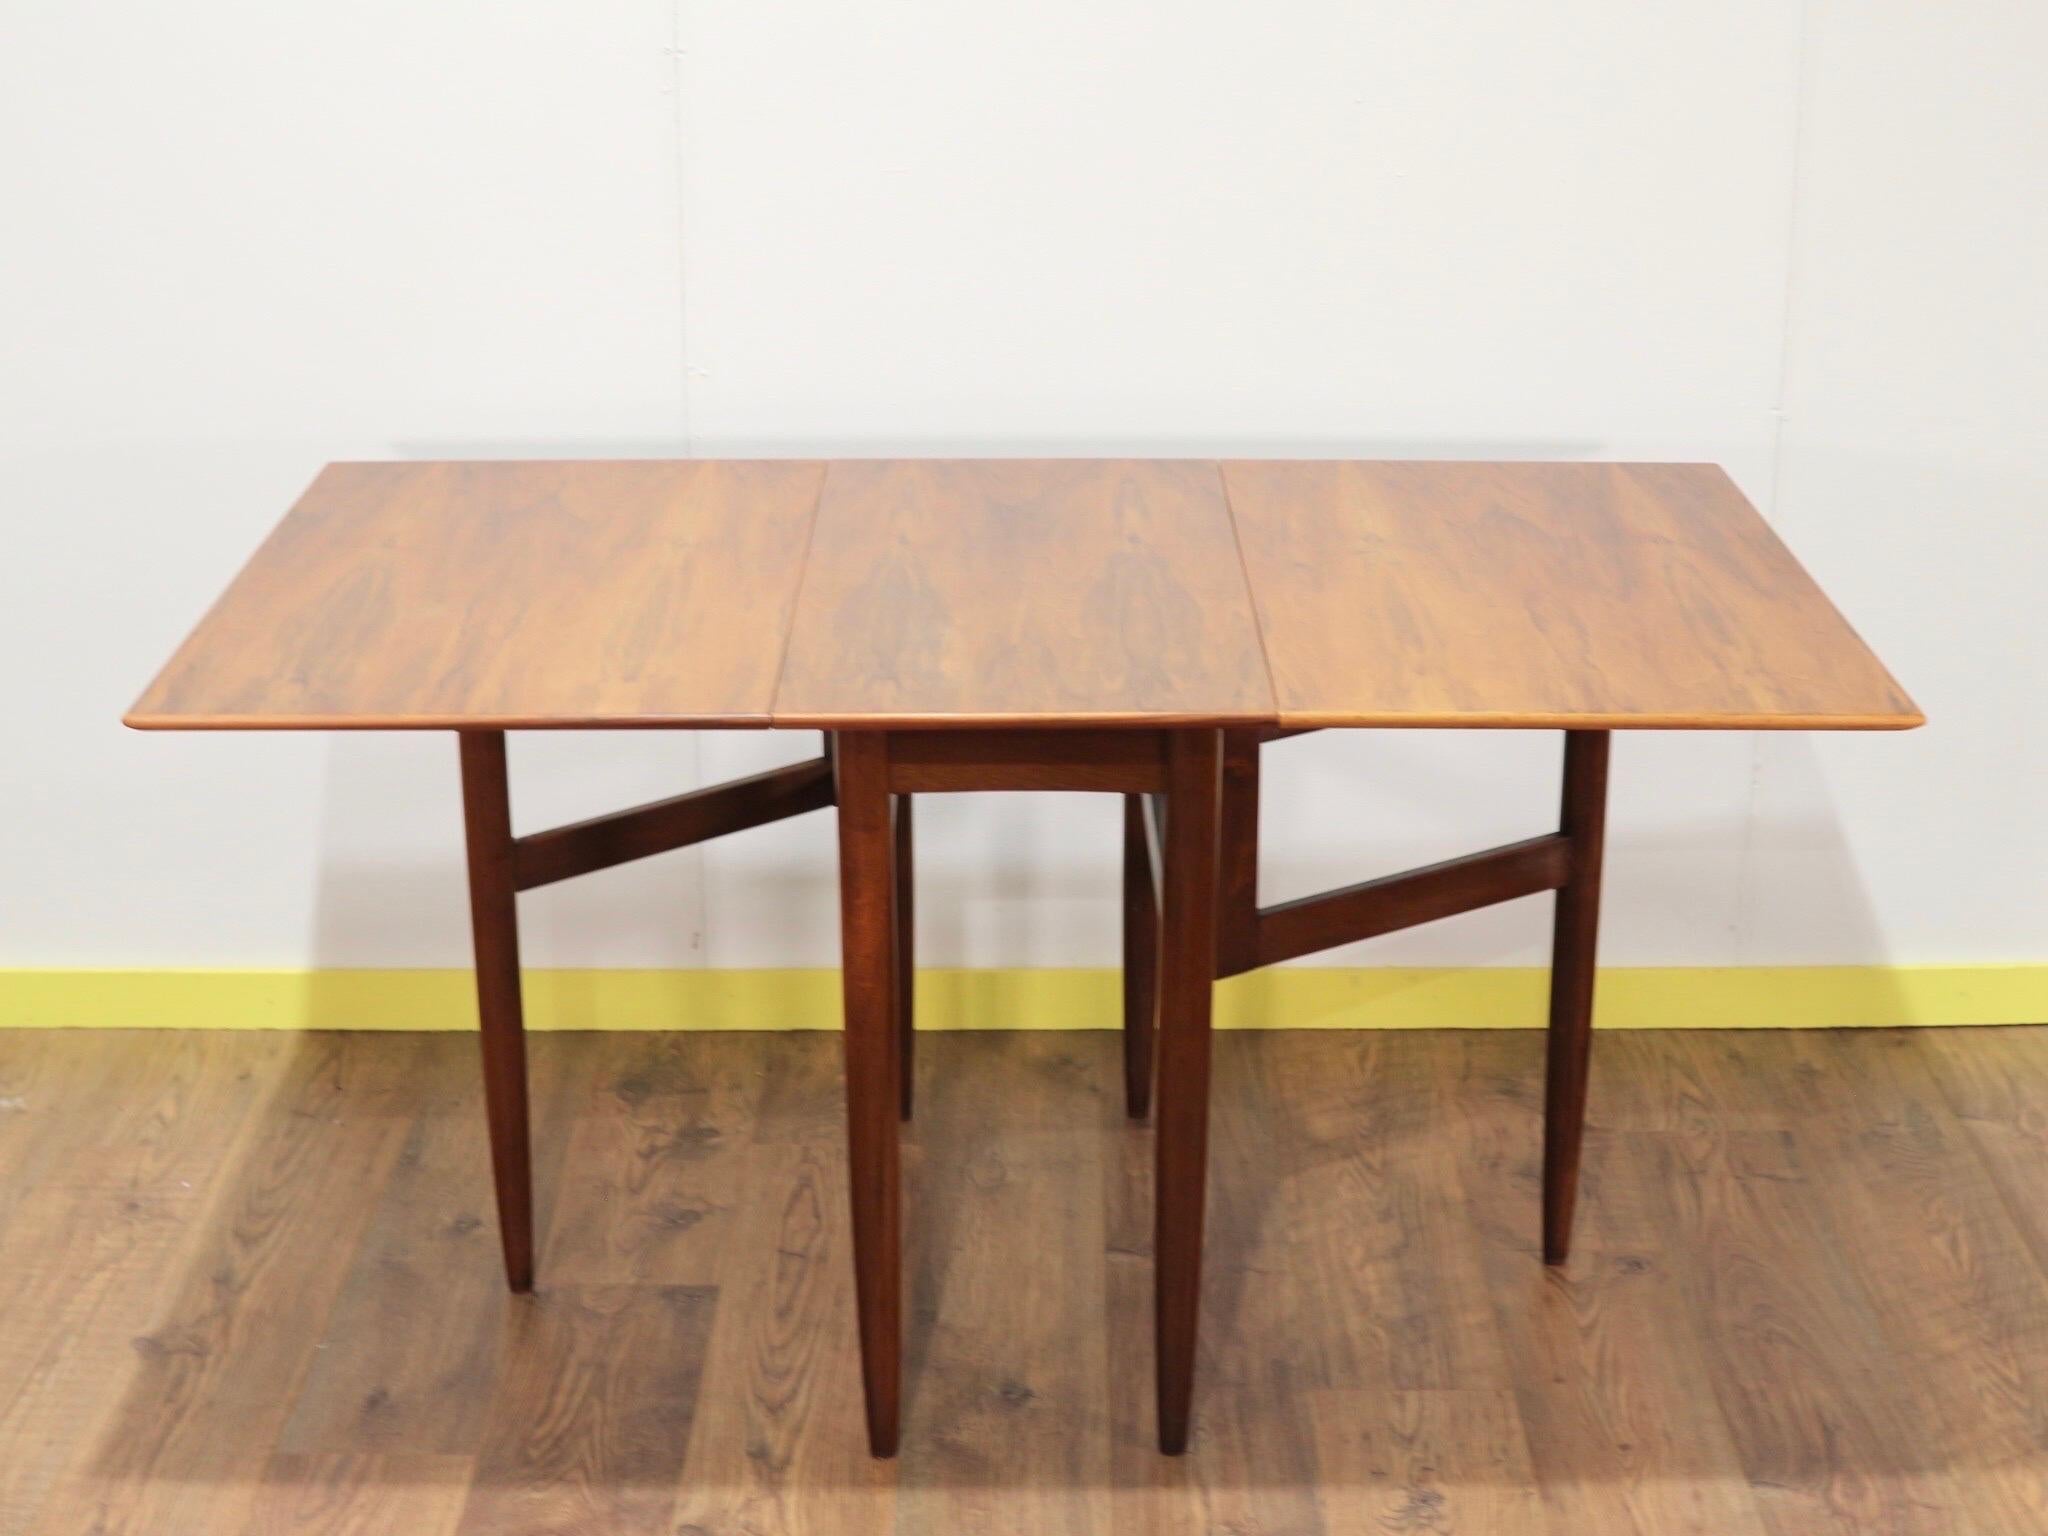 20th Century Mid-Century Modern Folding Dining Table by Morris of Glasgow